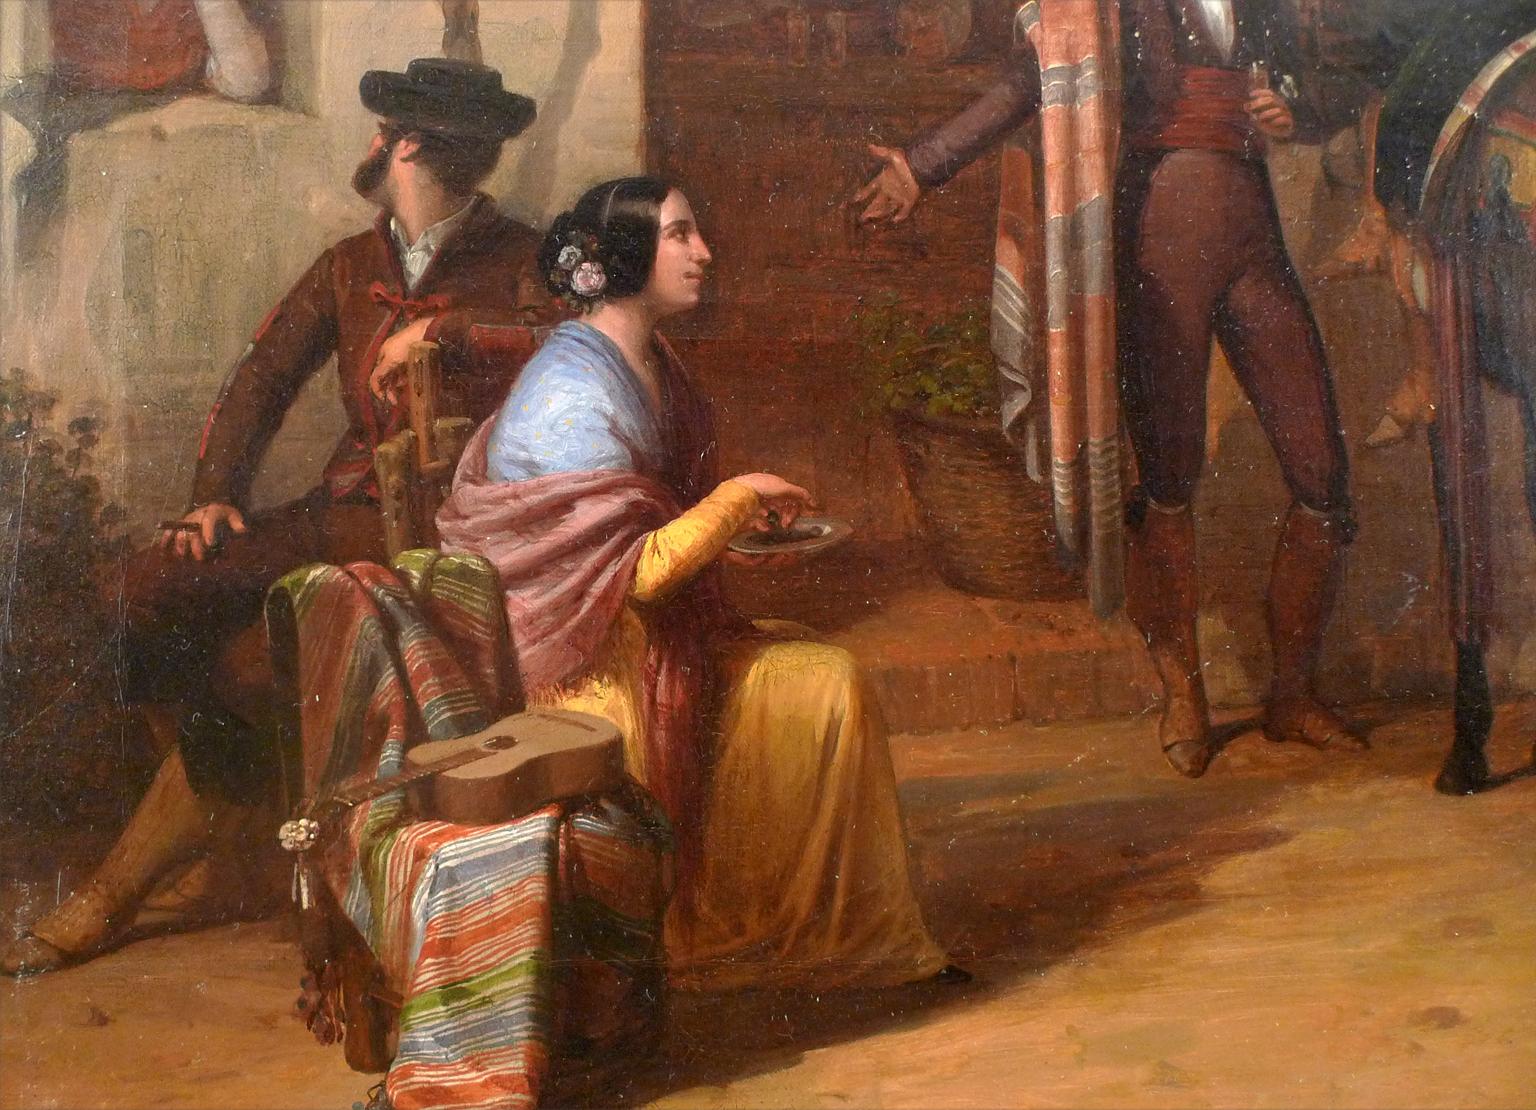 JOAQUÍN DOMÍNGUEZ BÉCQUER
Spanish, 1817 - 1879
OUTSIDE THE TAVERN
signed, located & dated 